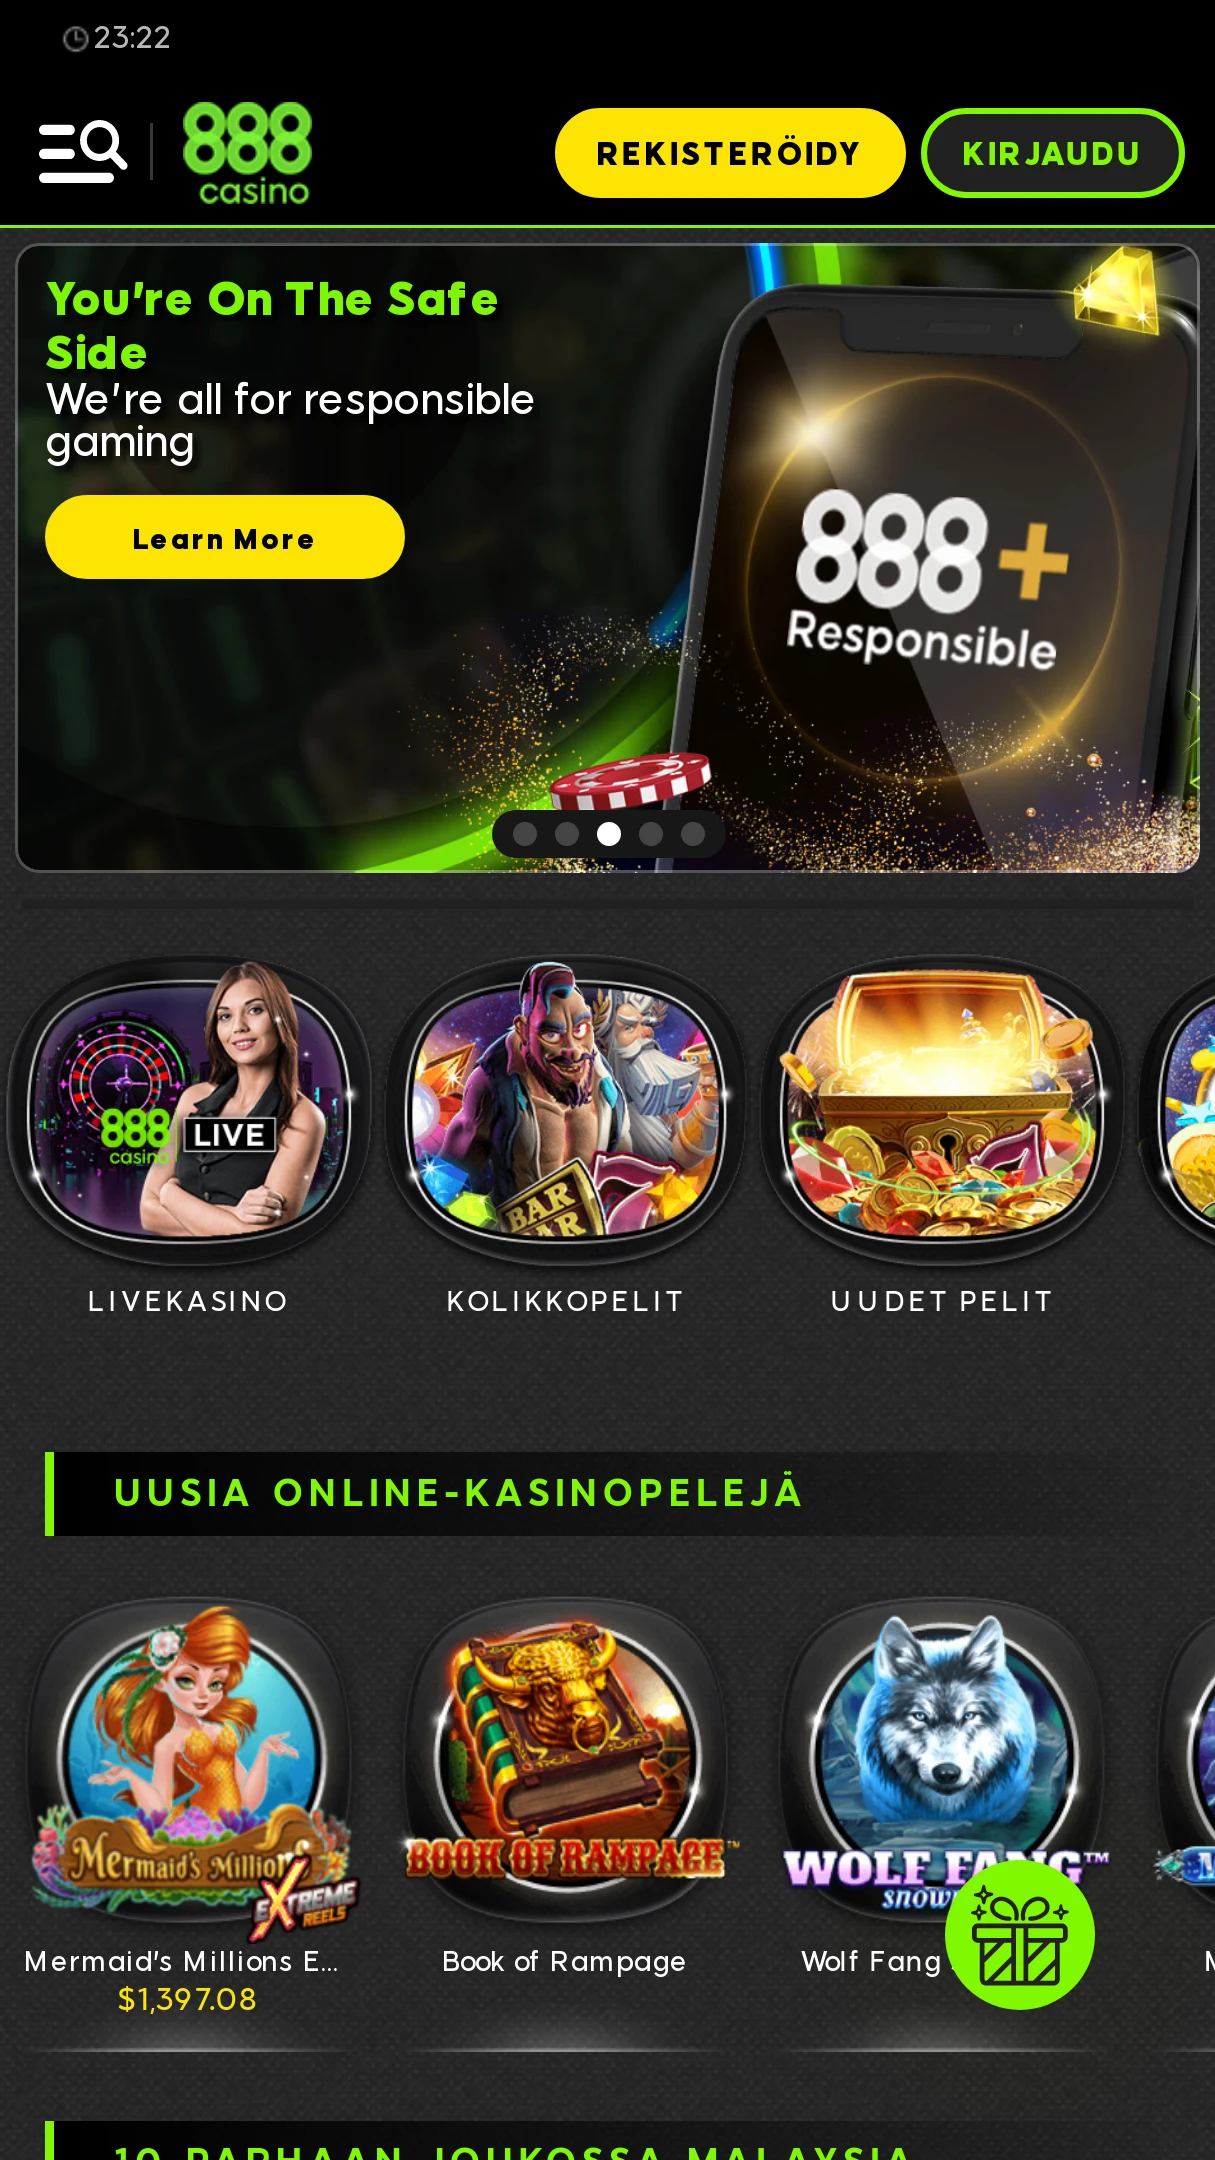 888 Casino Mobile App - 30+ Games for iPhone & Android